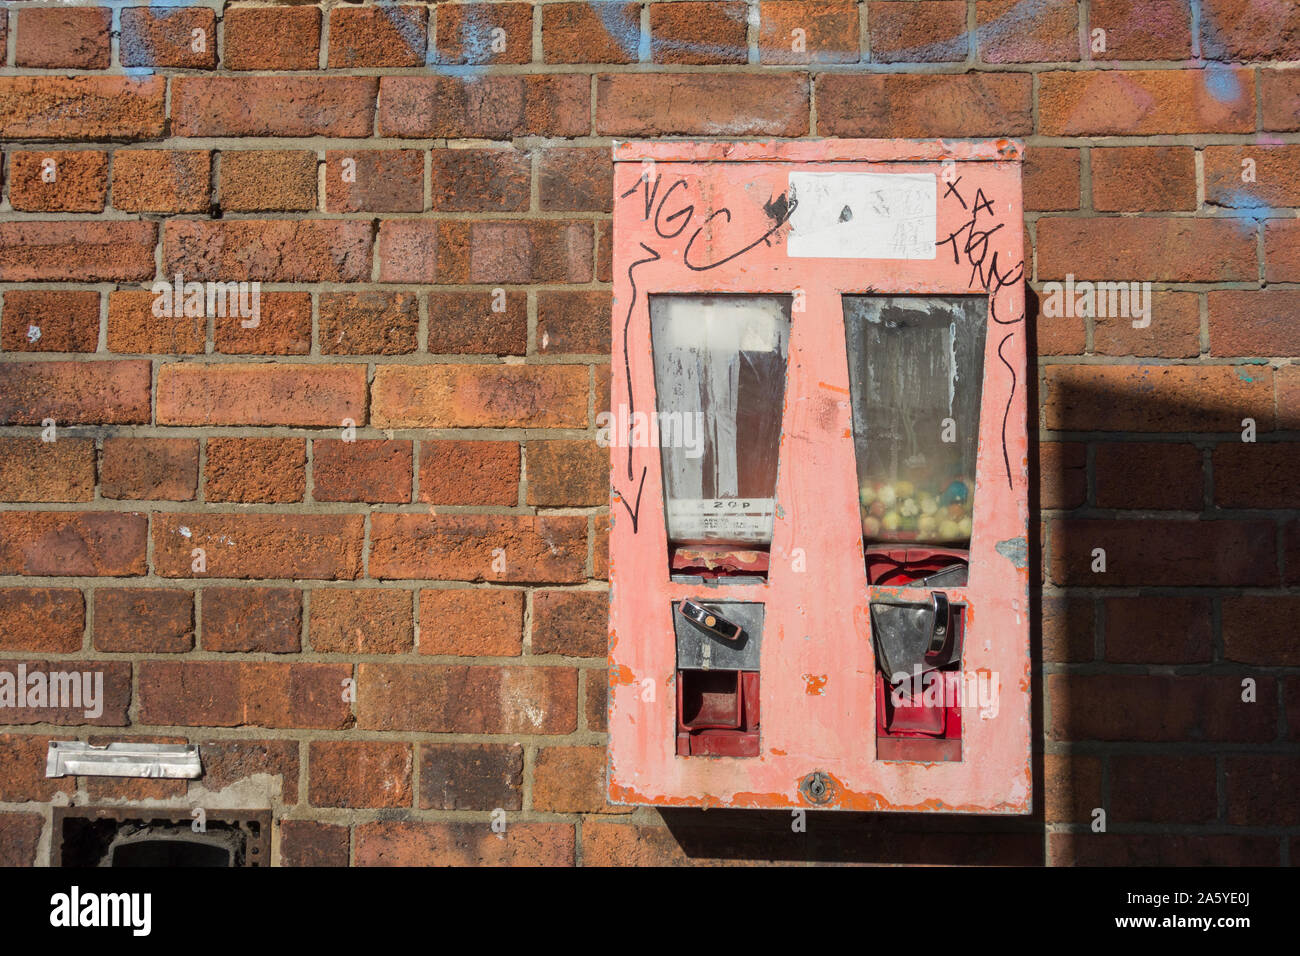 A derelict and worn sweet vending machine on a street in London, UK Stock Photo